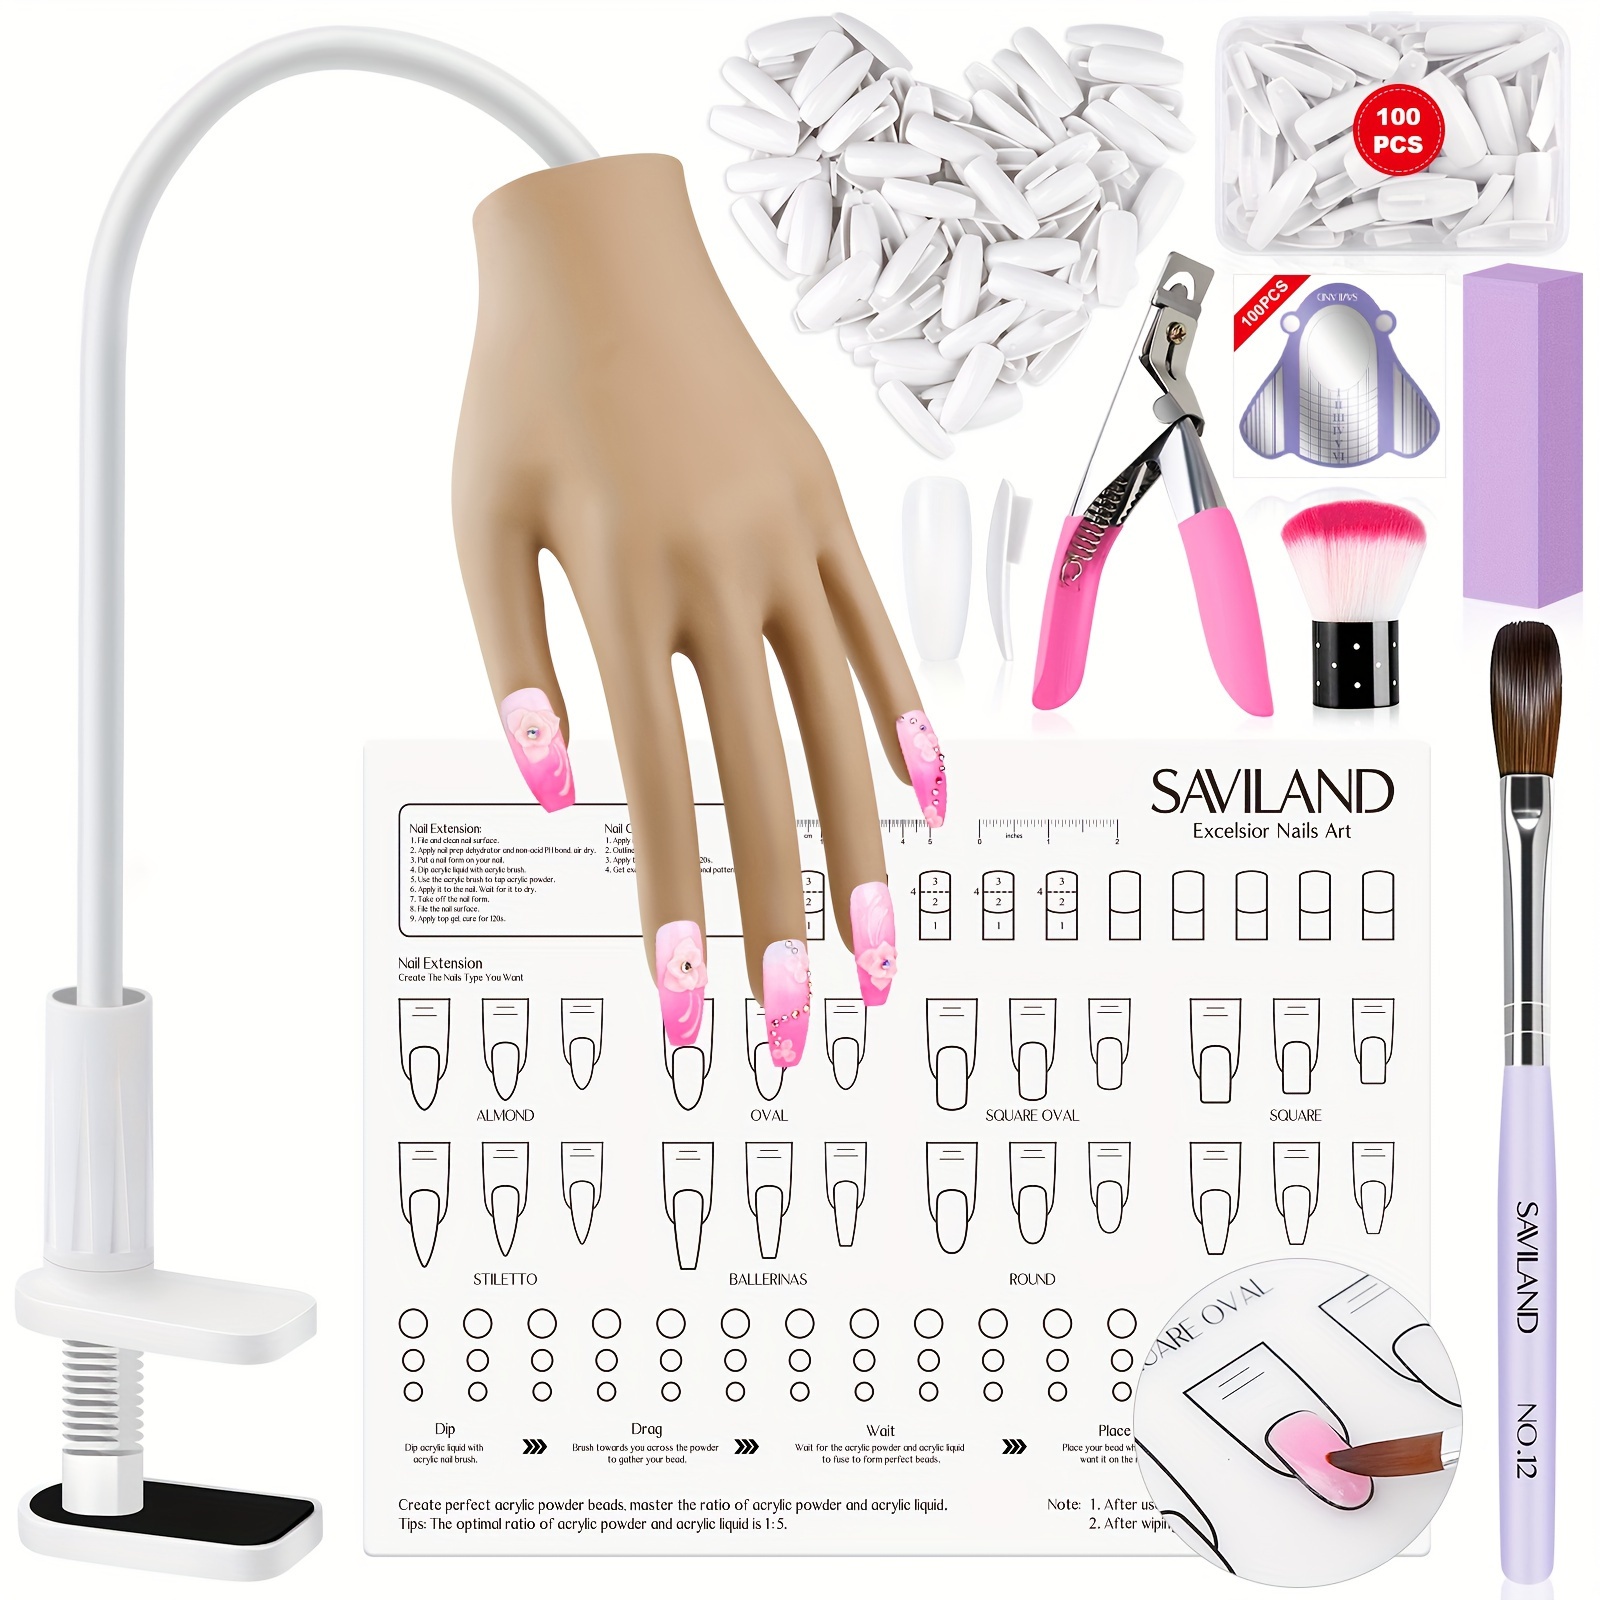 

Saviland Silicone Practice Hand For Acrylic Nails, Upgraded Flexible Moveable Fake Hands With No Breaking Or Falling, Manicure Training Hand Nail Kit With 100pcs Nails Tips Home Salon Christmas Gift